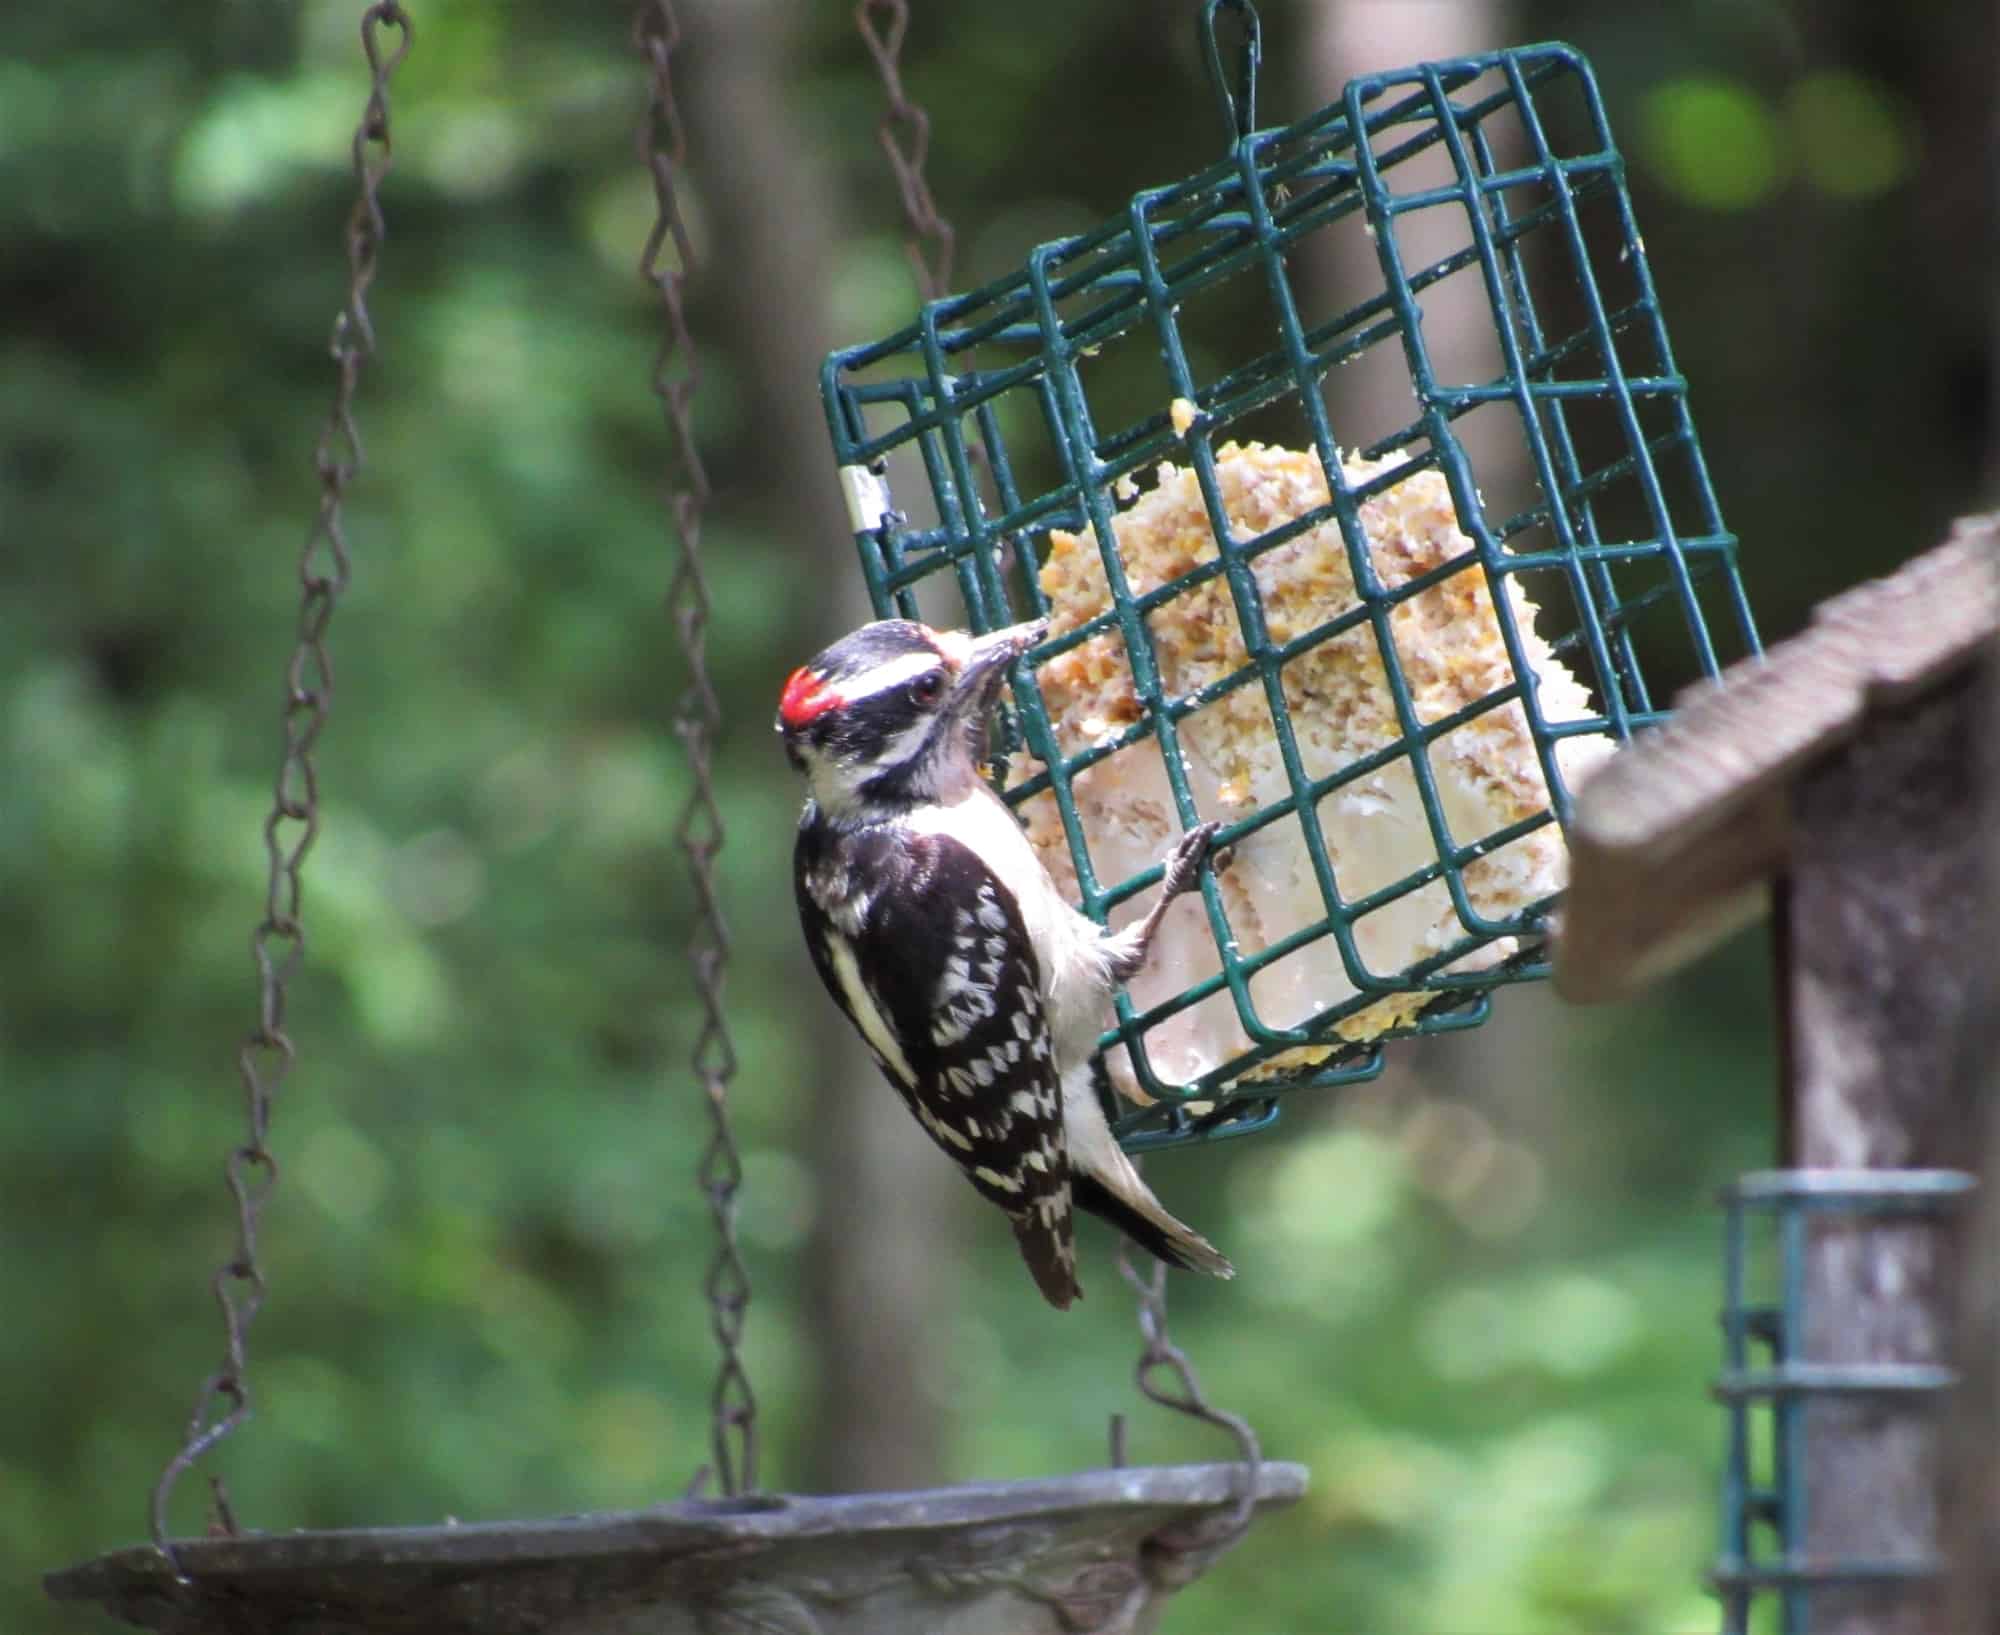 downy woodpecker eating from Suet Feeder
